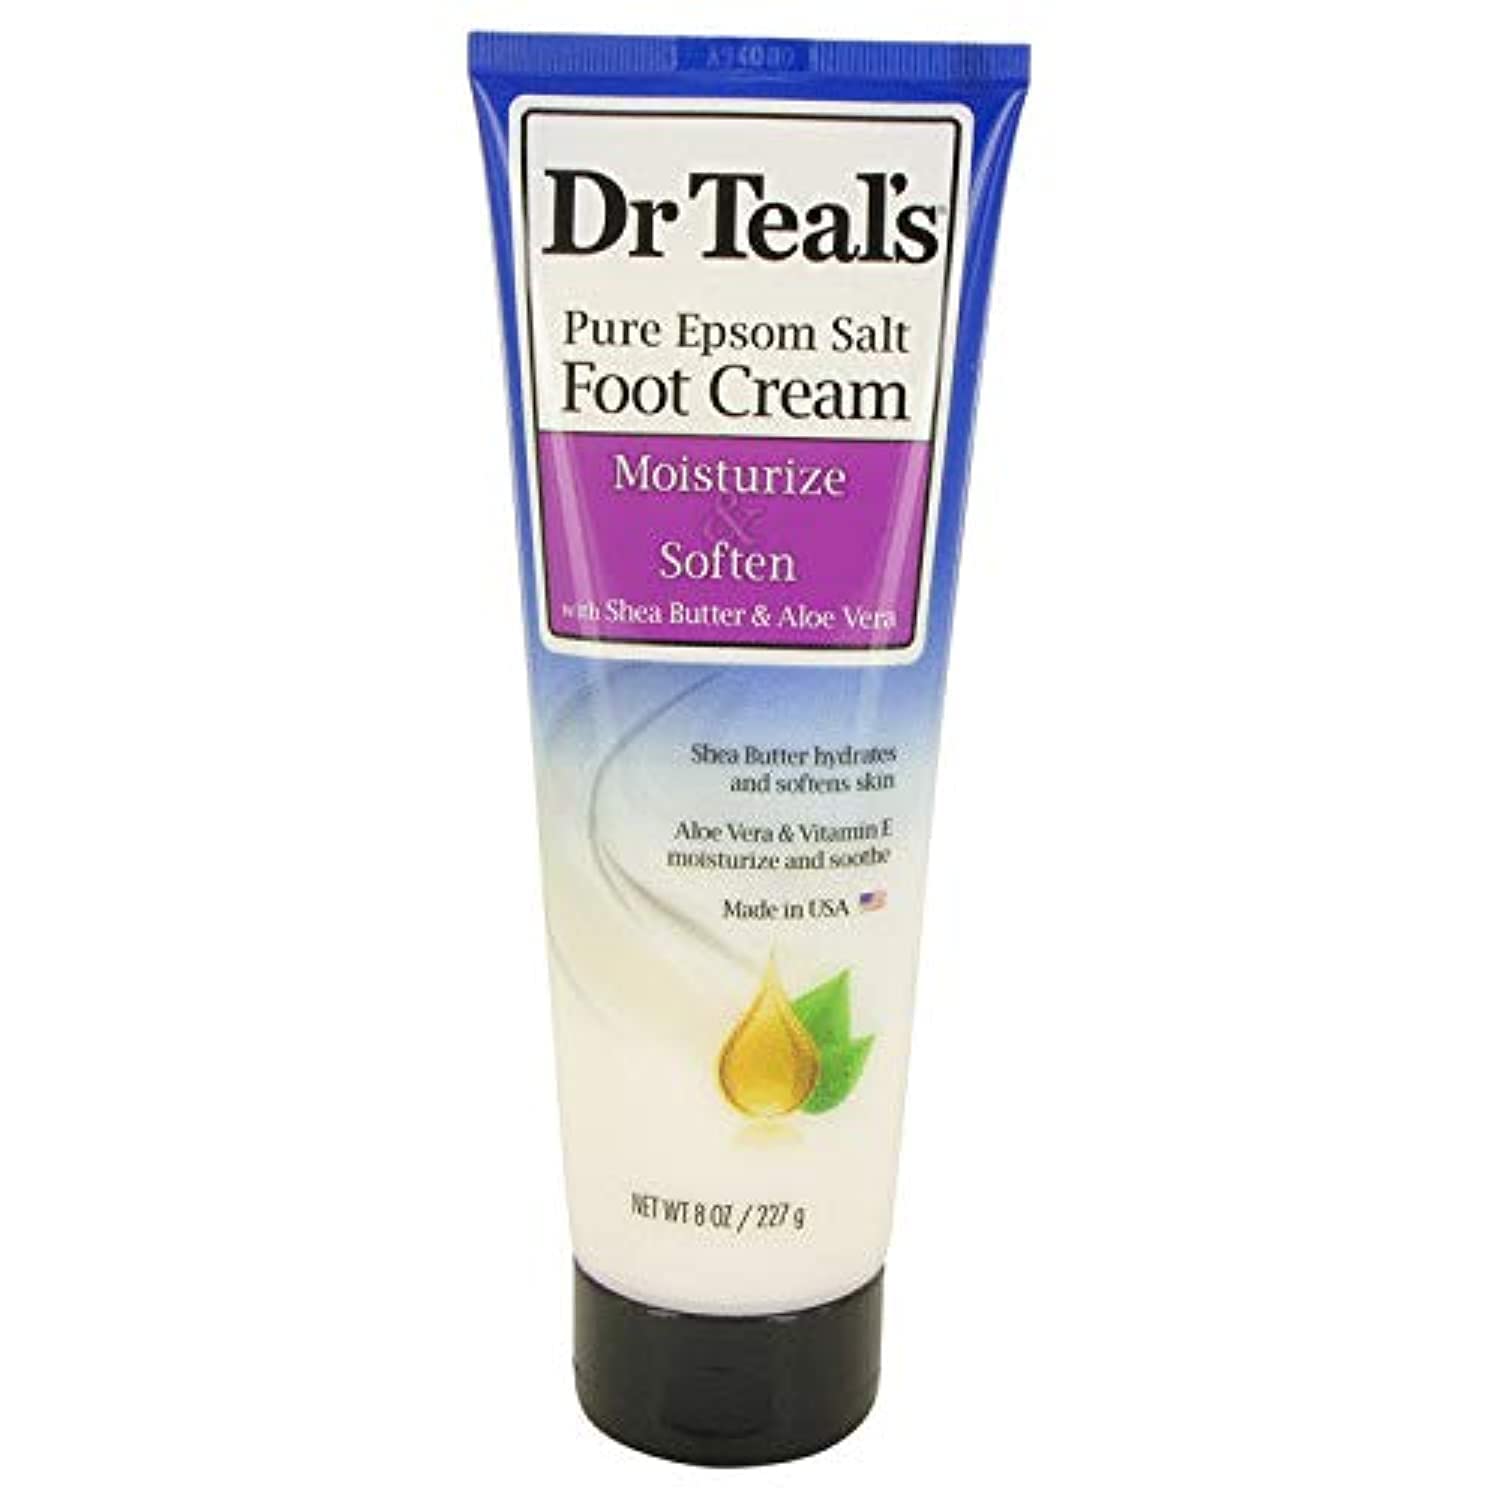 Pure Epsom Salt Foot Cream by Dr Teal's ,with Shea Butter & Aloe Vera & Vitamin E 8 oz for Women